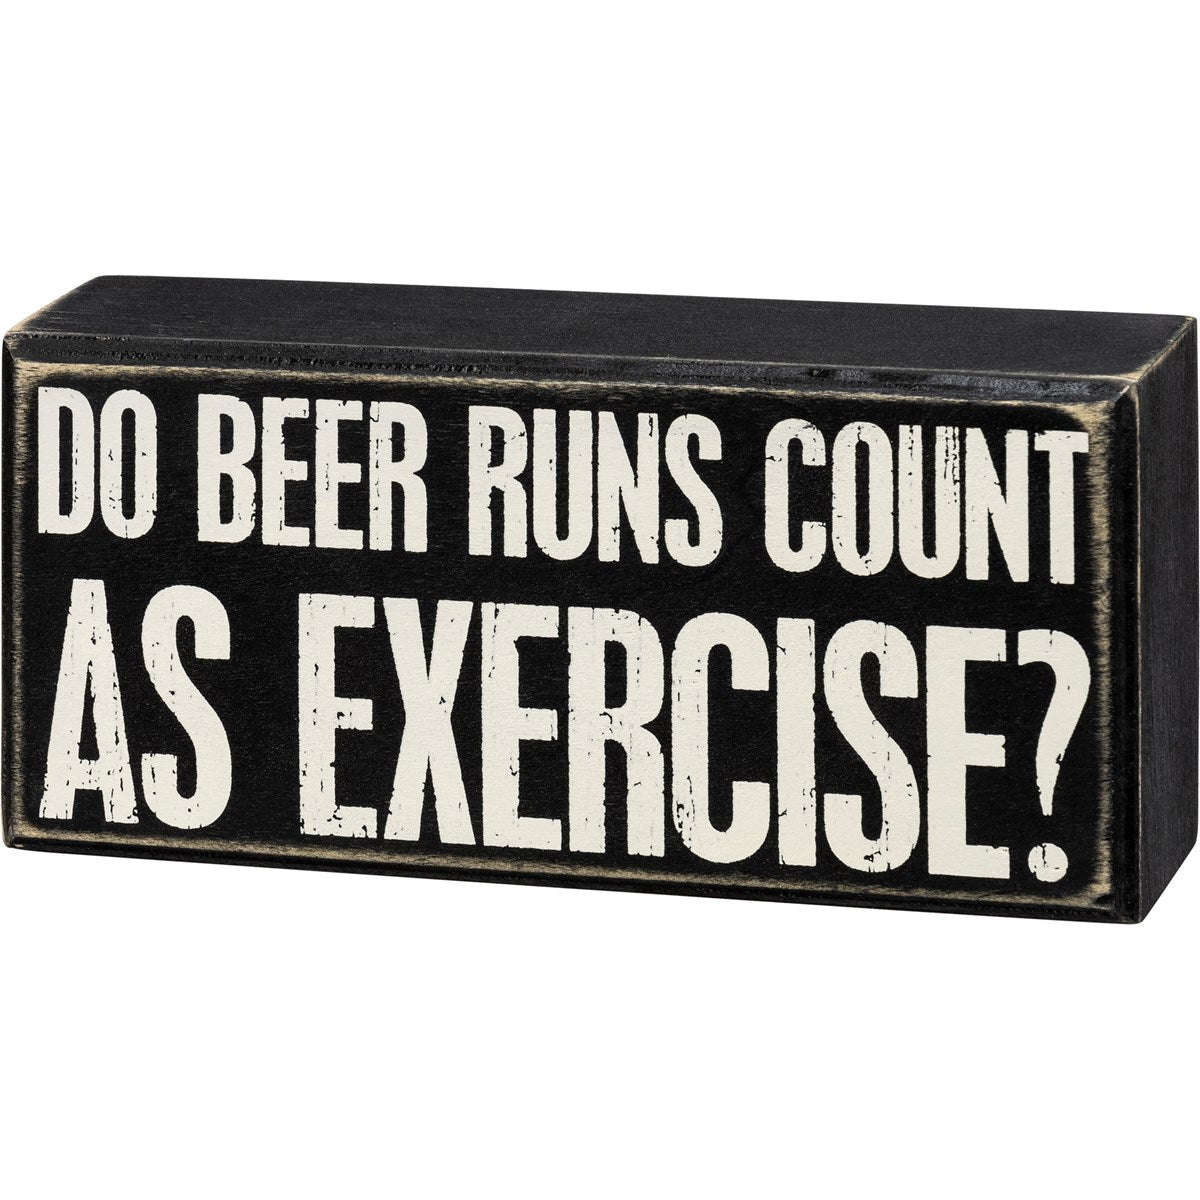 "DO BEER RUNS COUNT AS EXERCISE?" BOX SIGN